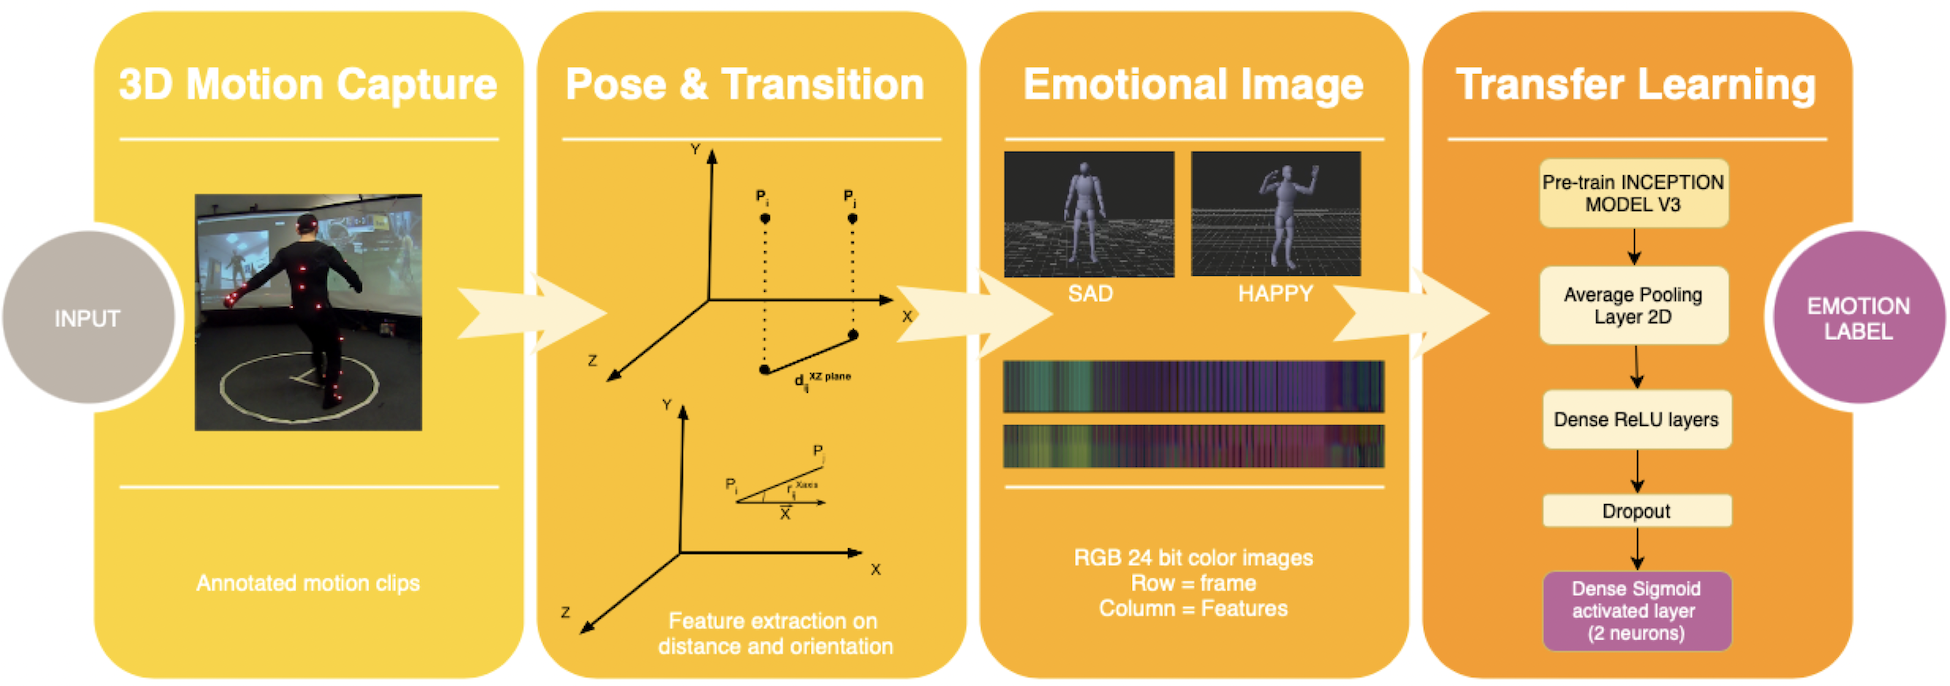 Emotion Recognition from 3D Motion Capture Data using Deep CNNs